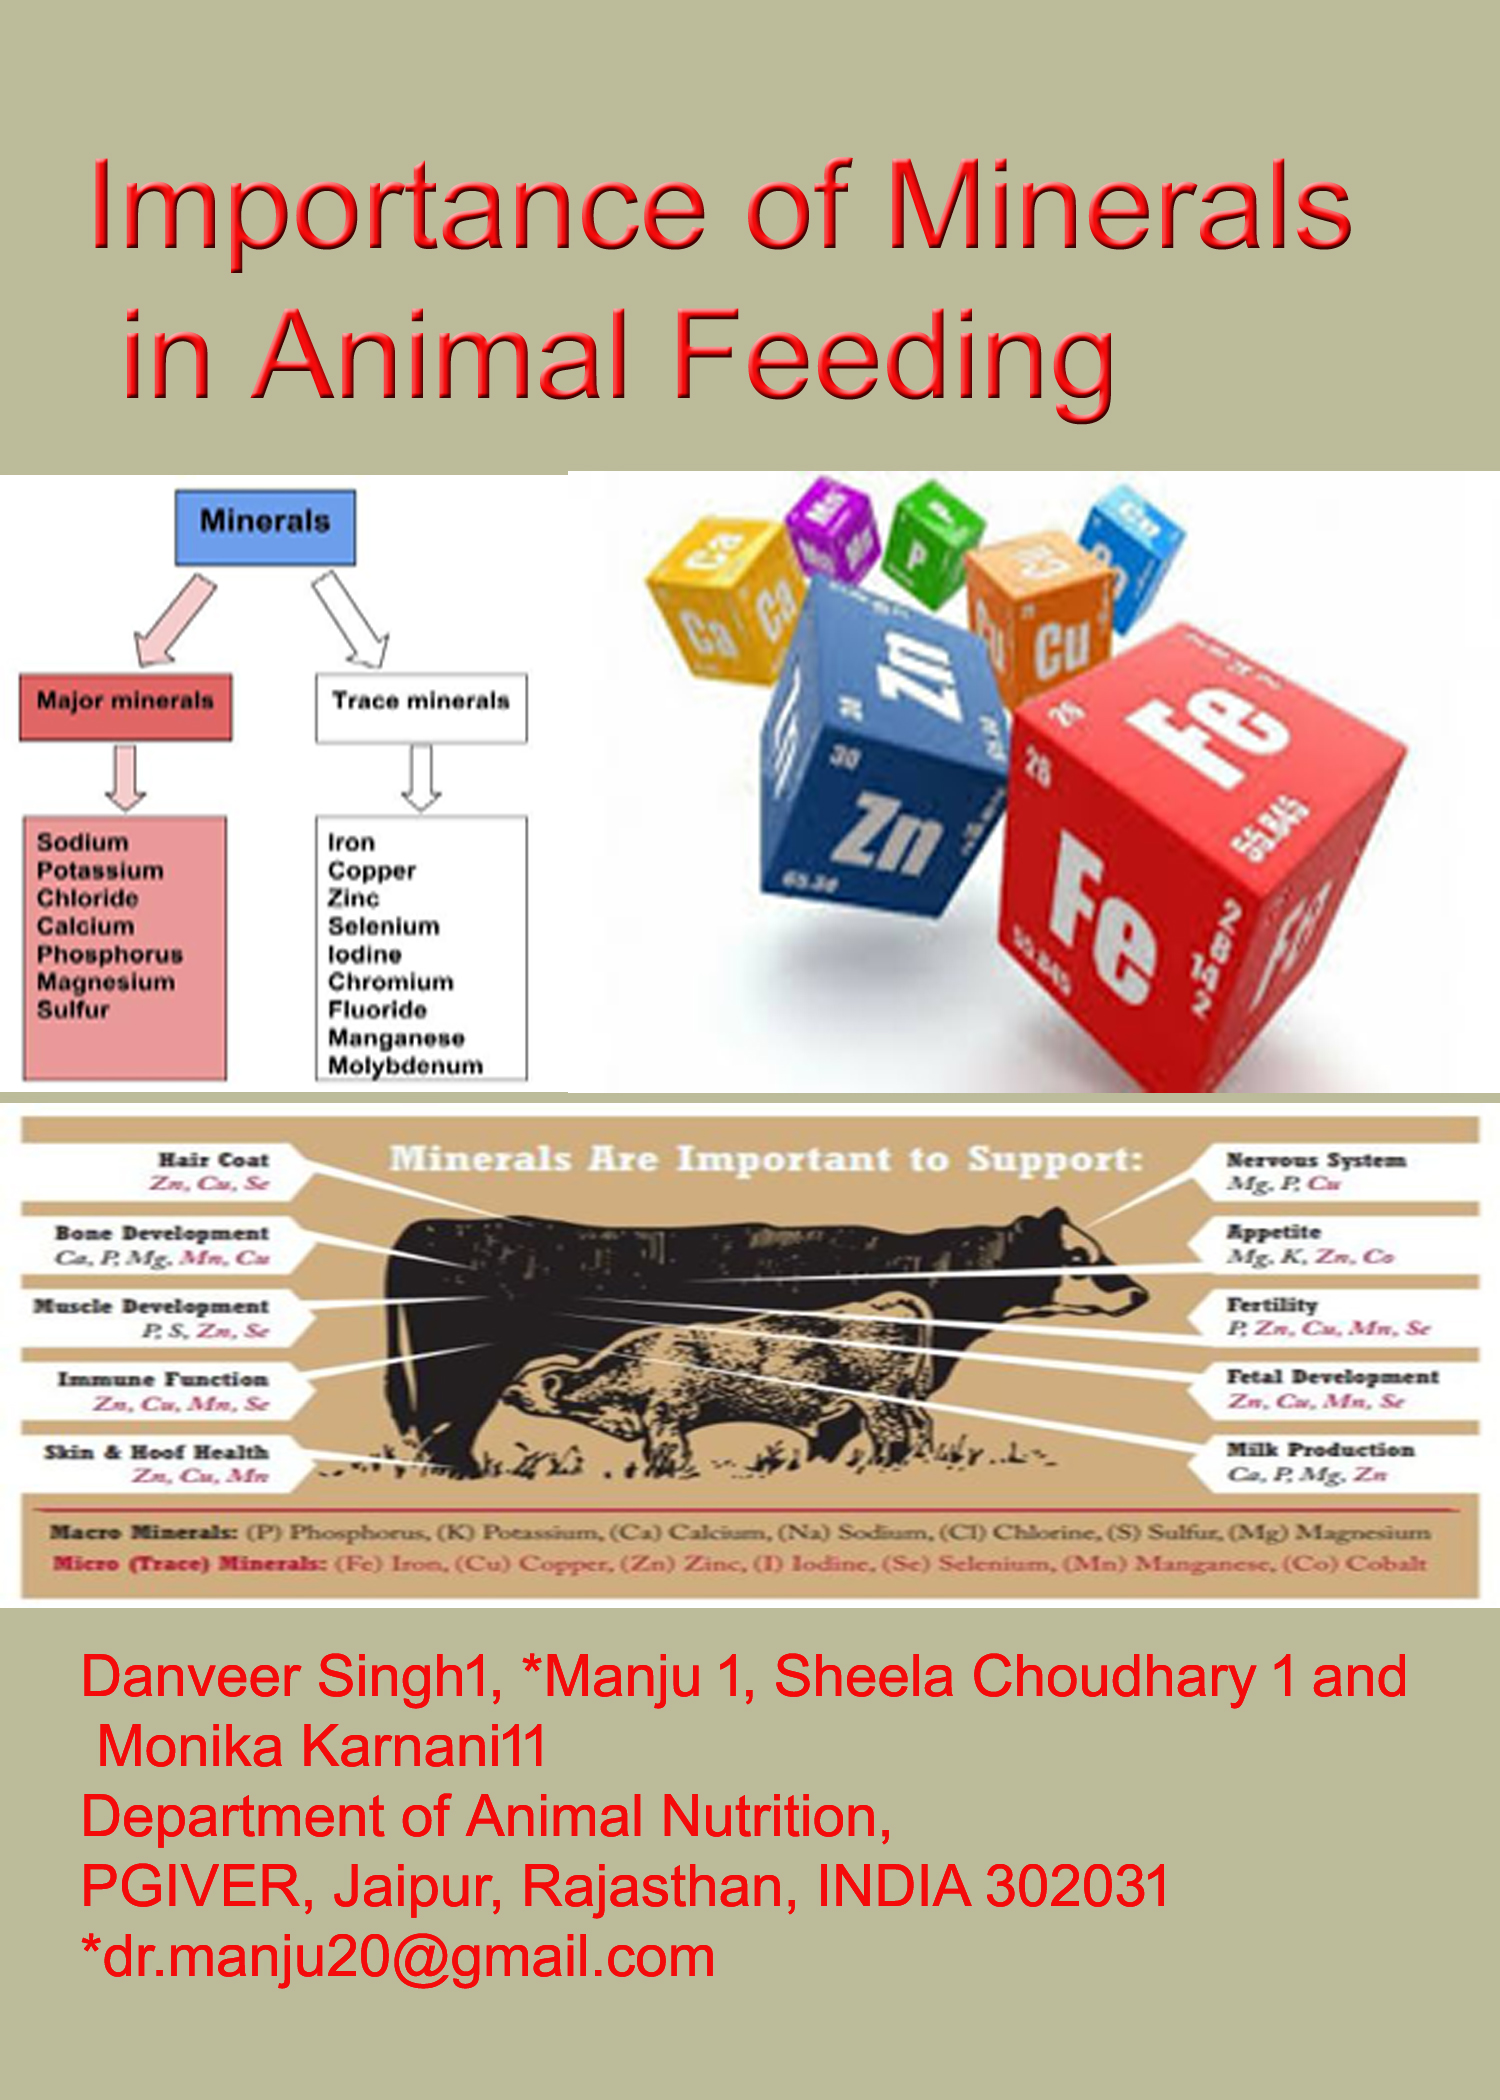 Importance of Minerals in Animal Feeding – Pashudhan praharee